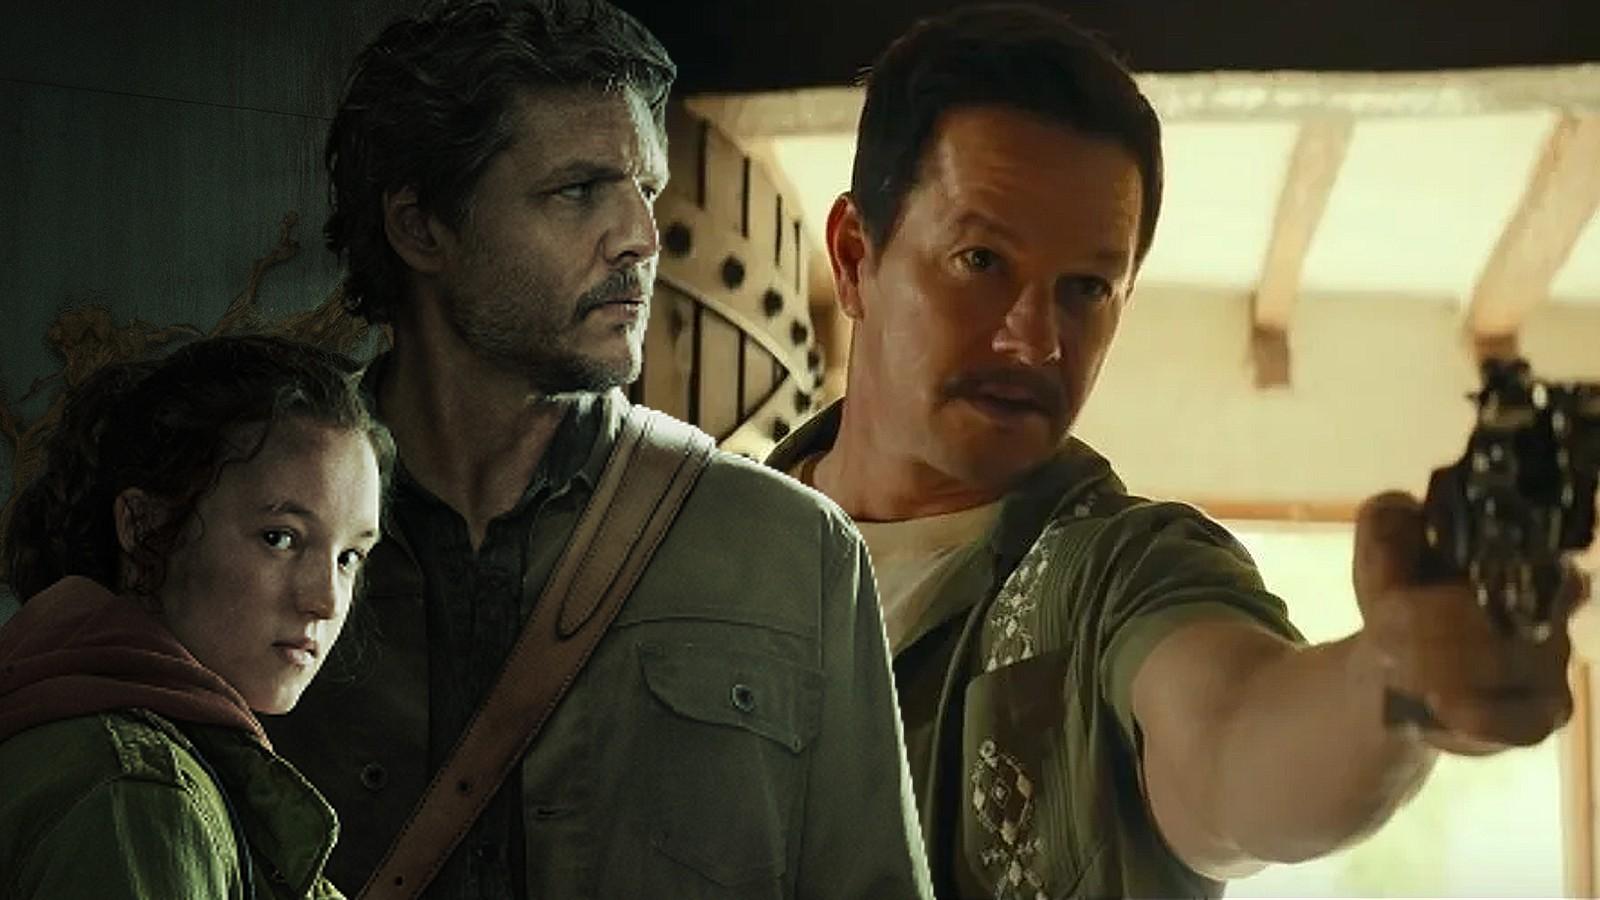 Stills from The Last of Us and Mark Wahlberg in the Uncharted movie